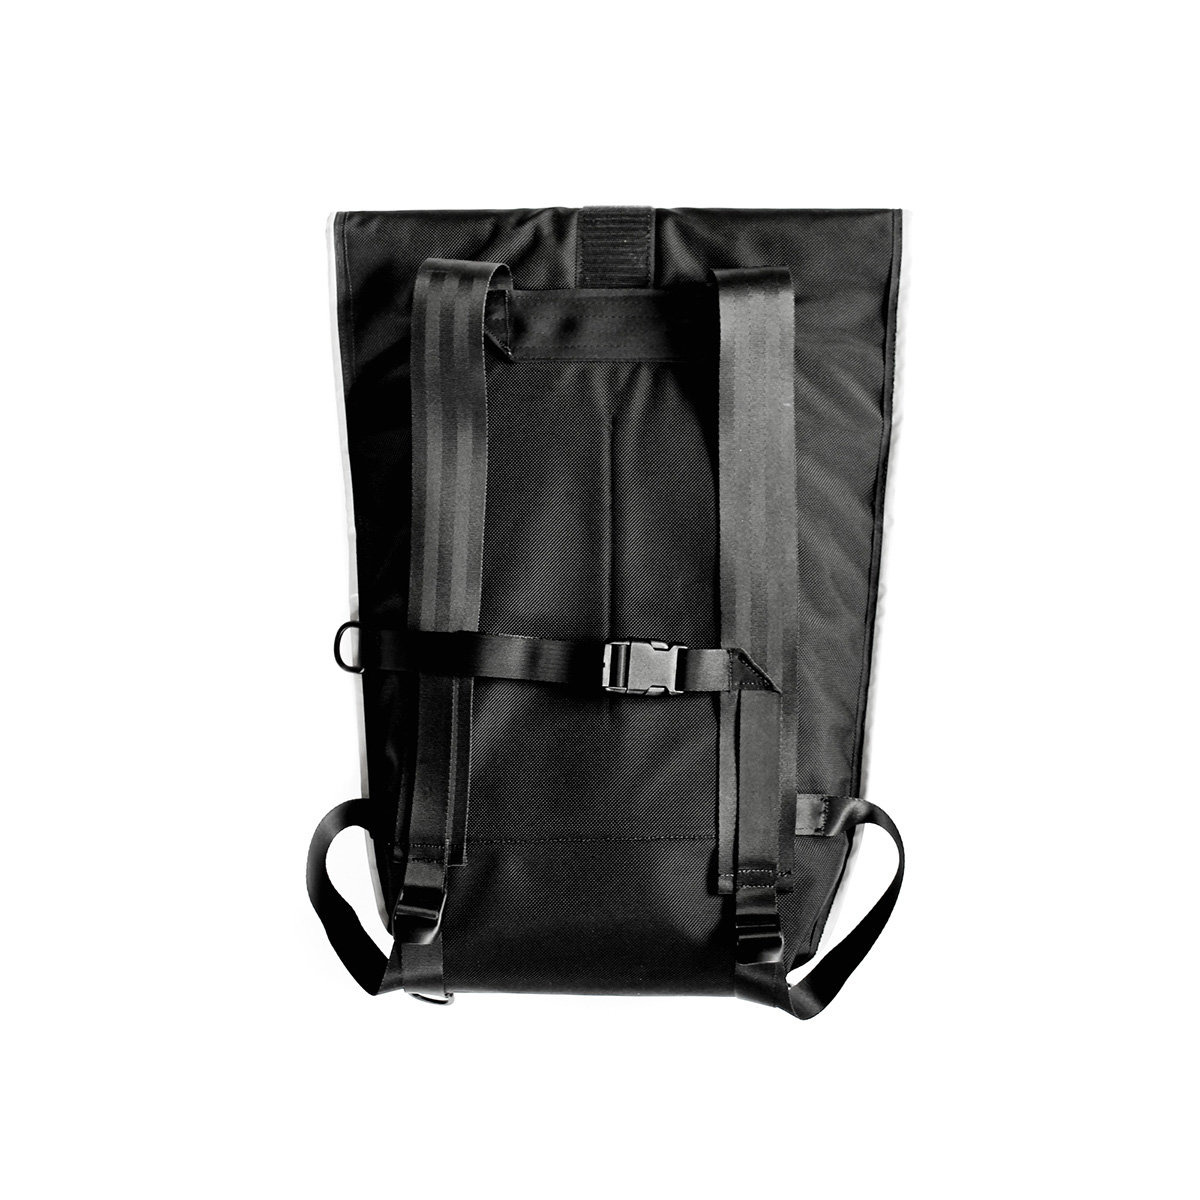 backpack DAWN reflective messenger accessories